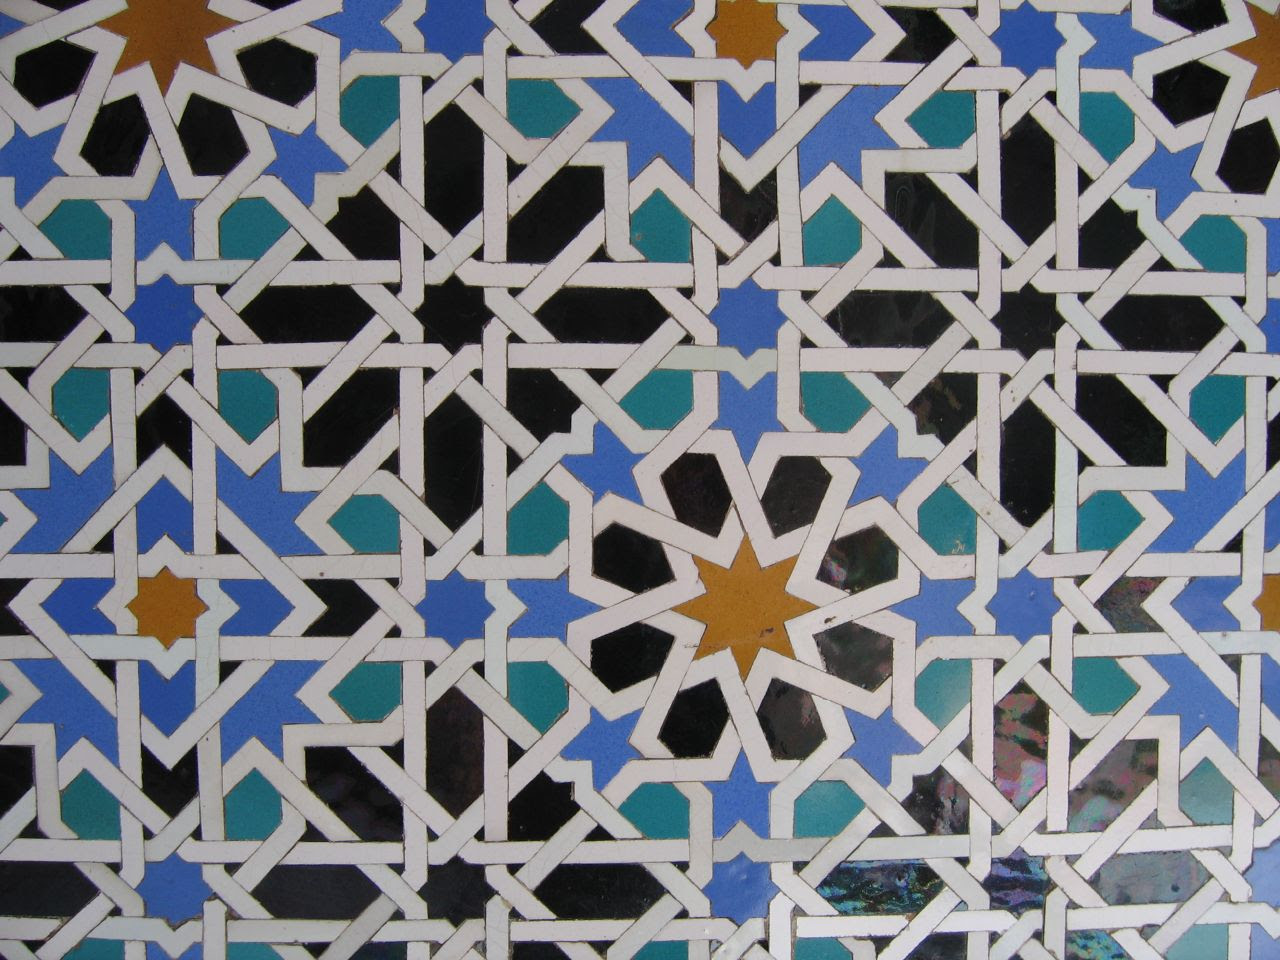 Example of Islamic geometry in mosaic tile art form